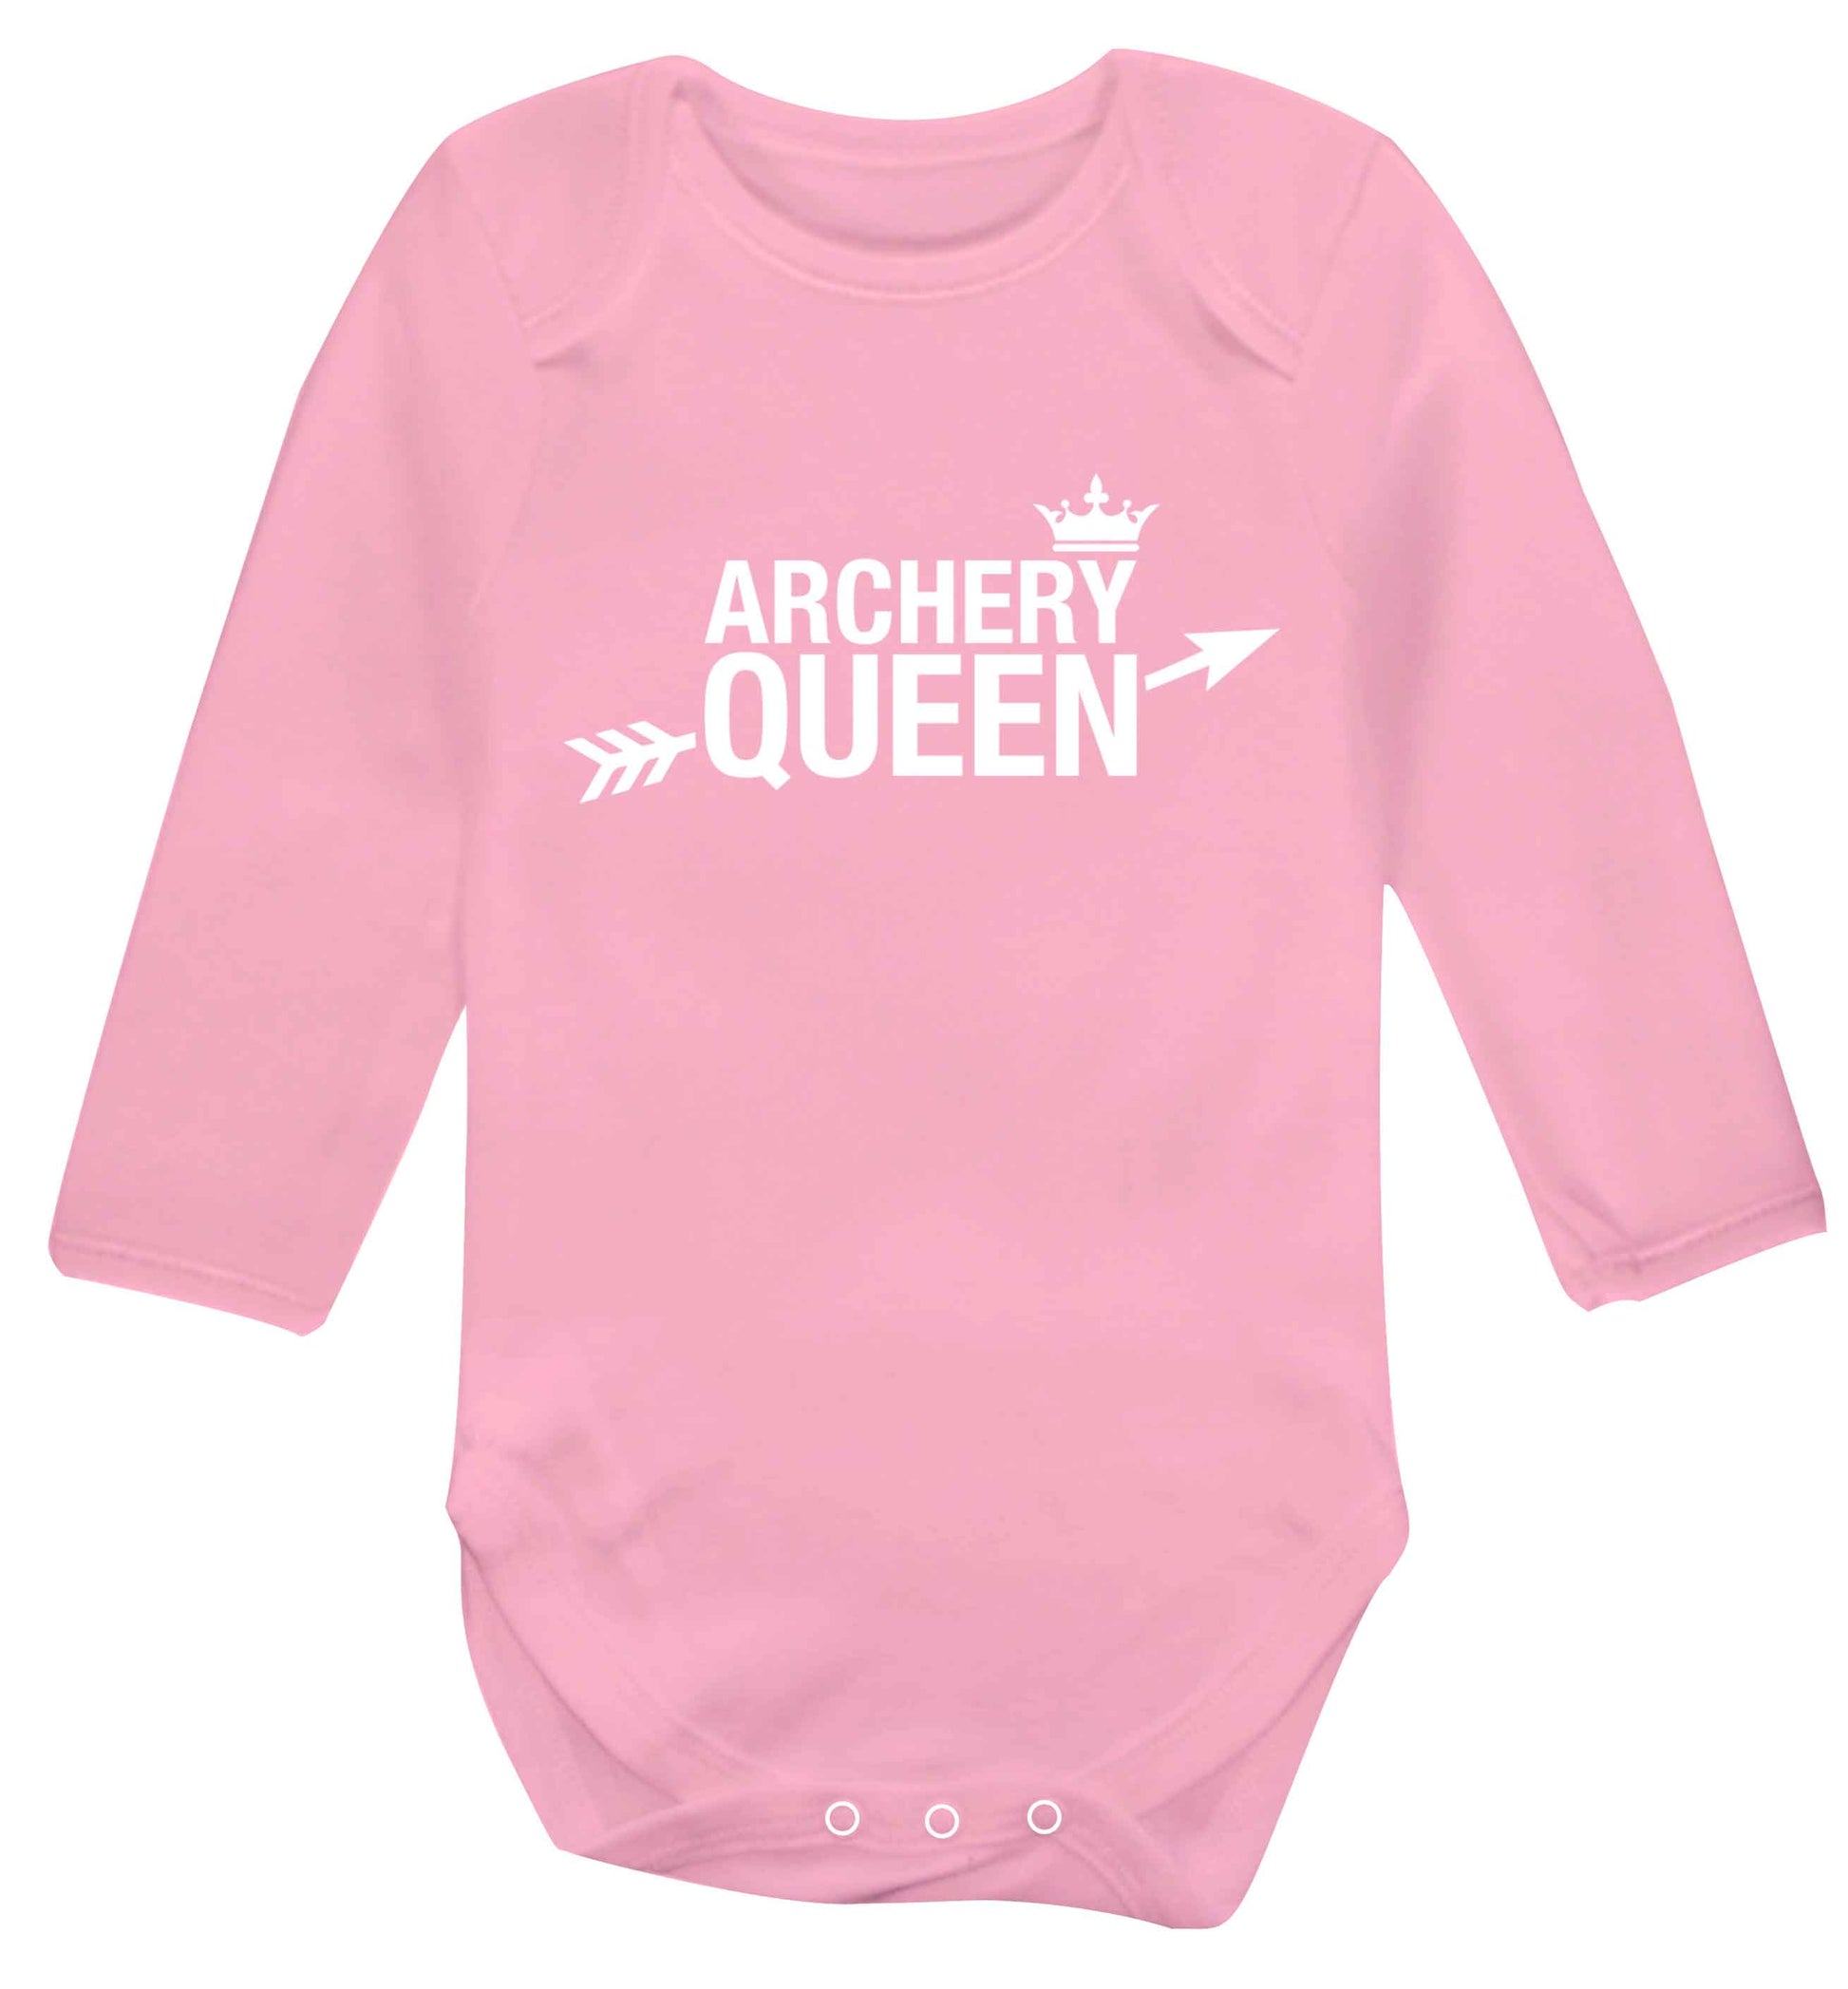 Archery queen Baby Vest long sleeved pale pink 6-12 months